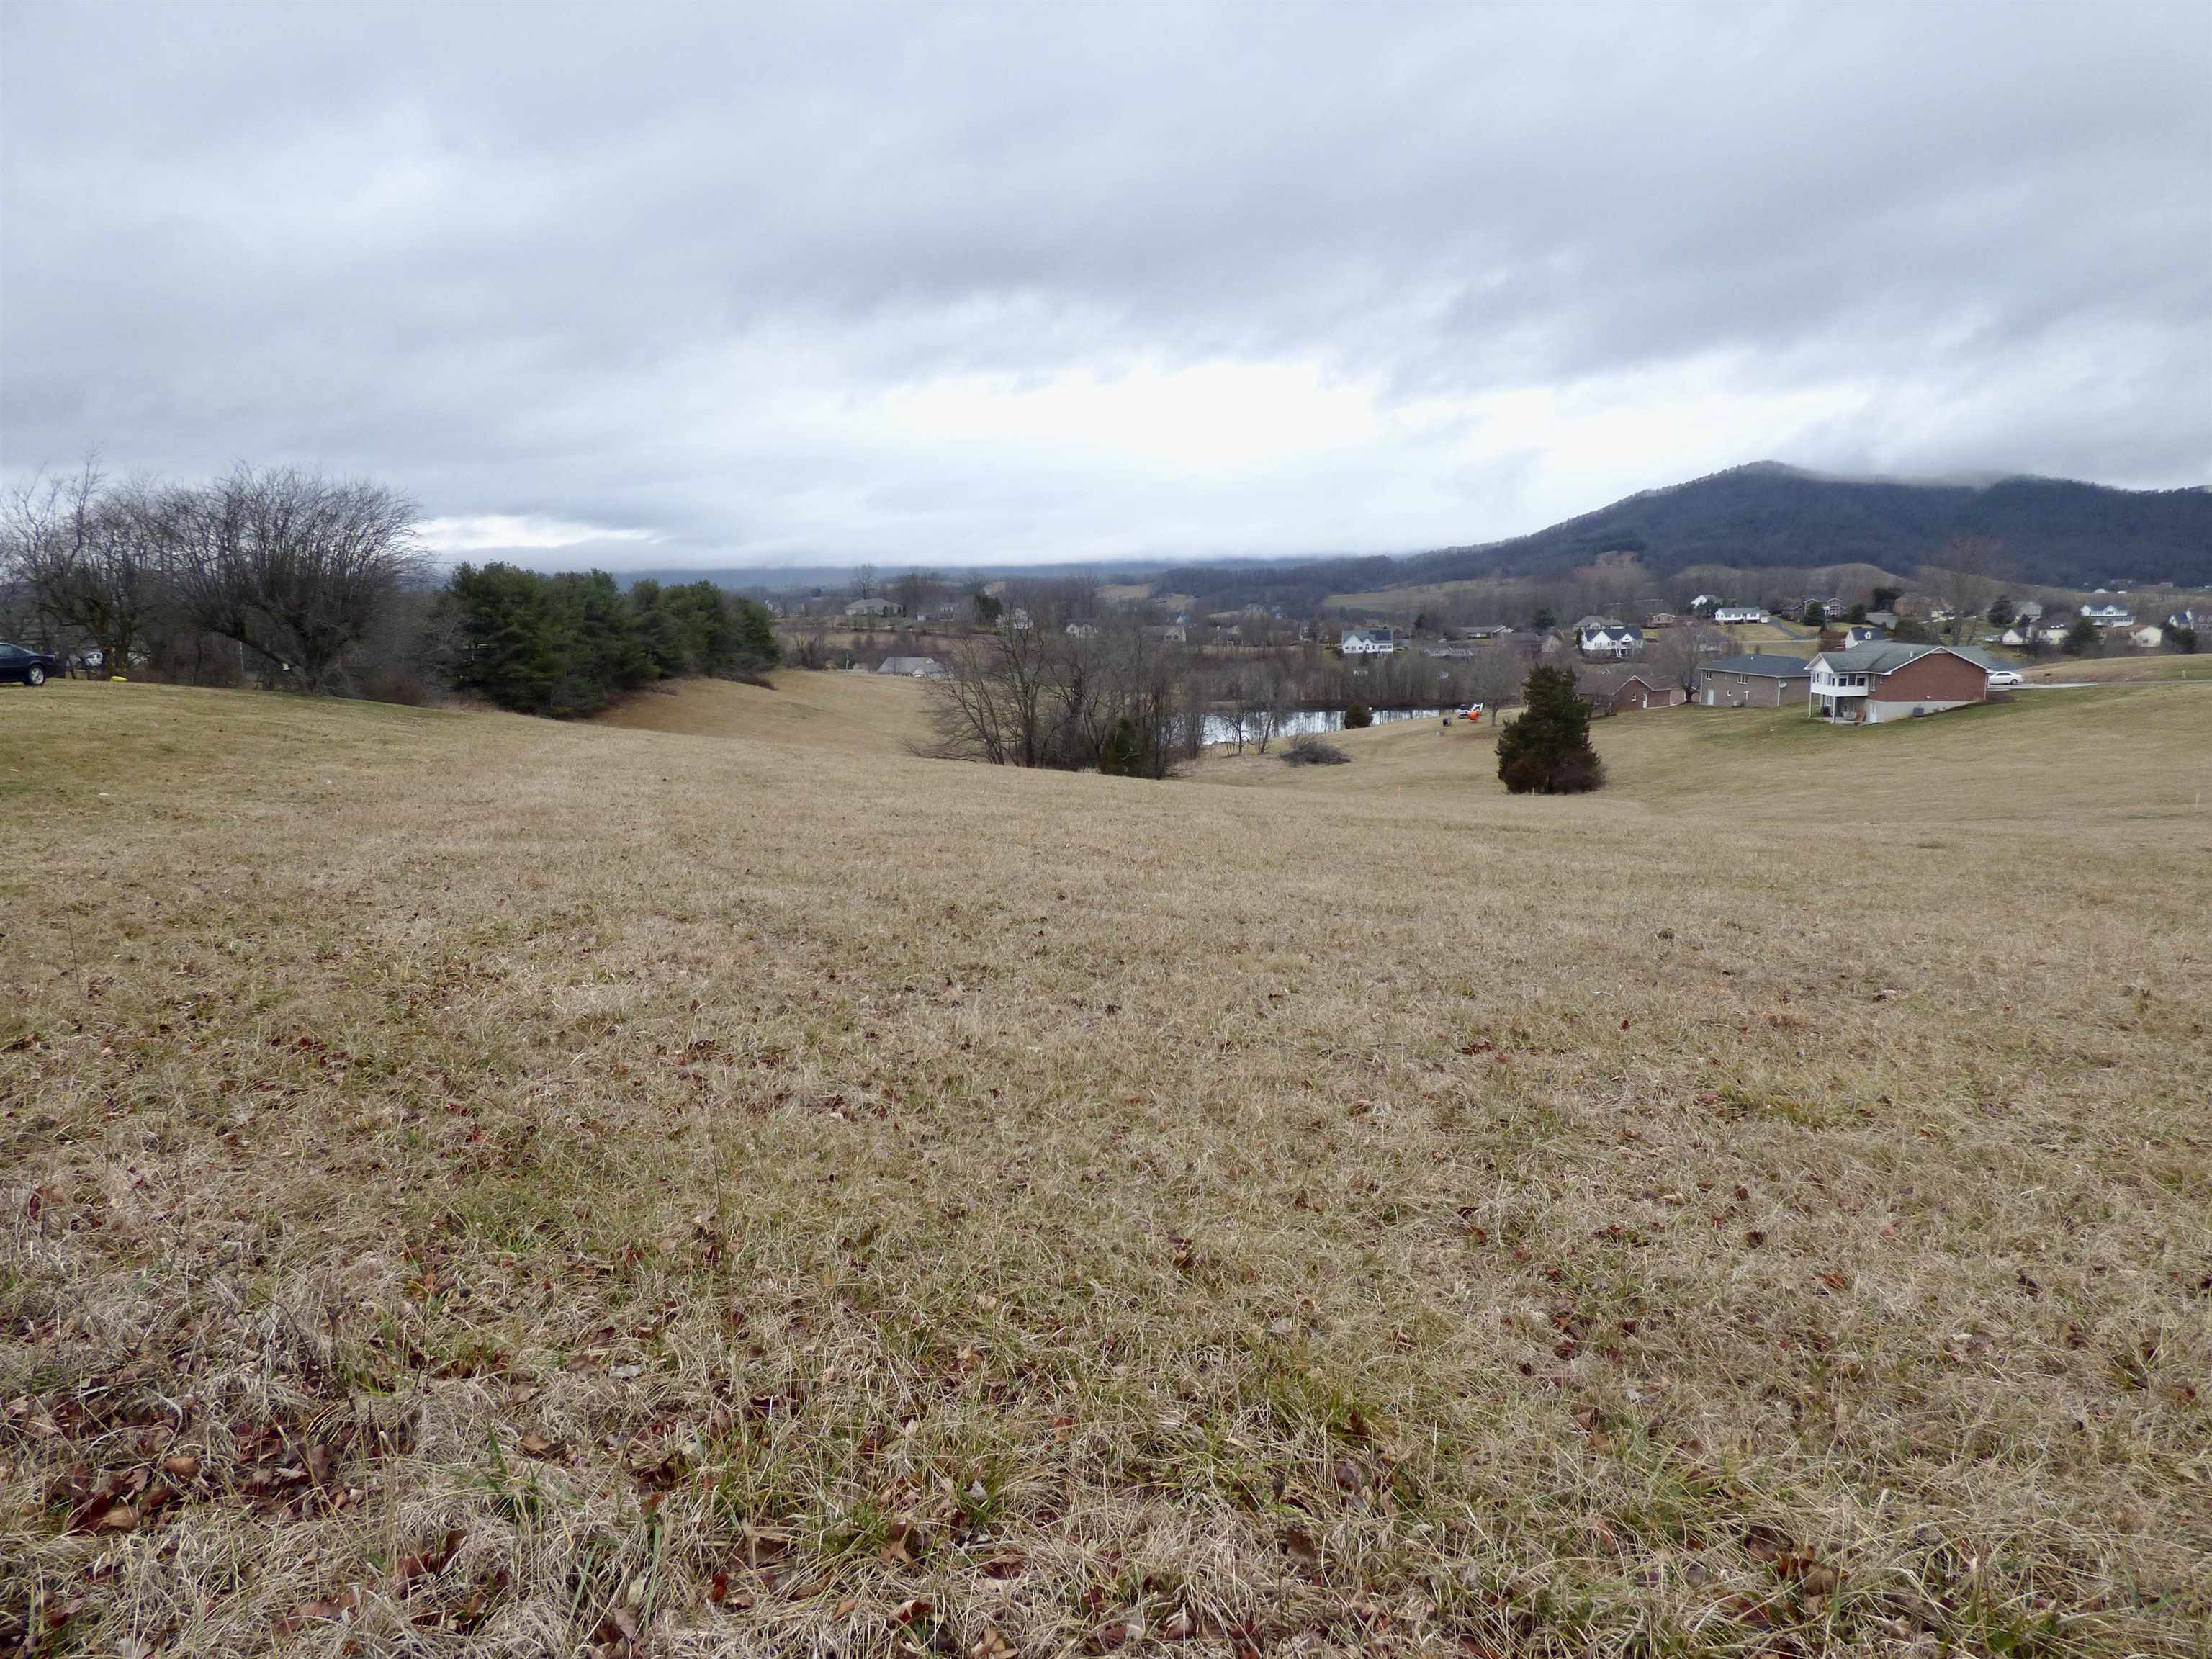 This .502-acre residential lot offers a great building site with mountain views and is zoned R1 for residential use. It's conveniently located with easy interstate access and has town water and sewer available. It is ideal for those looking to build a home in a scenic yet accessible location.